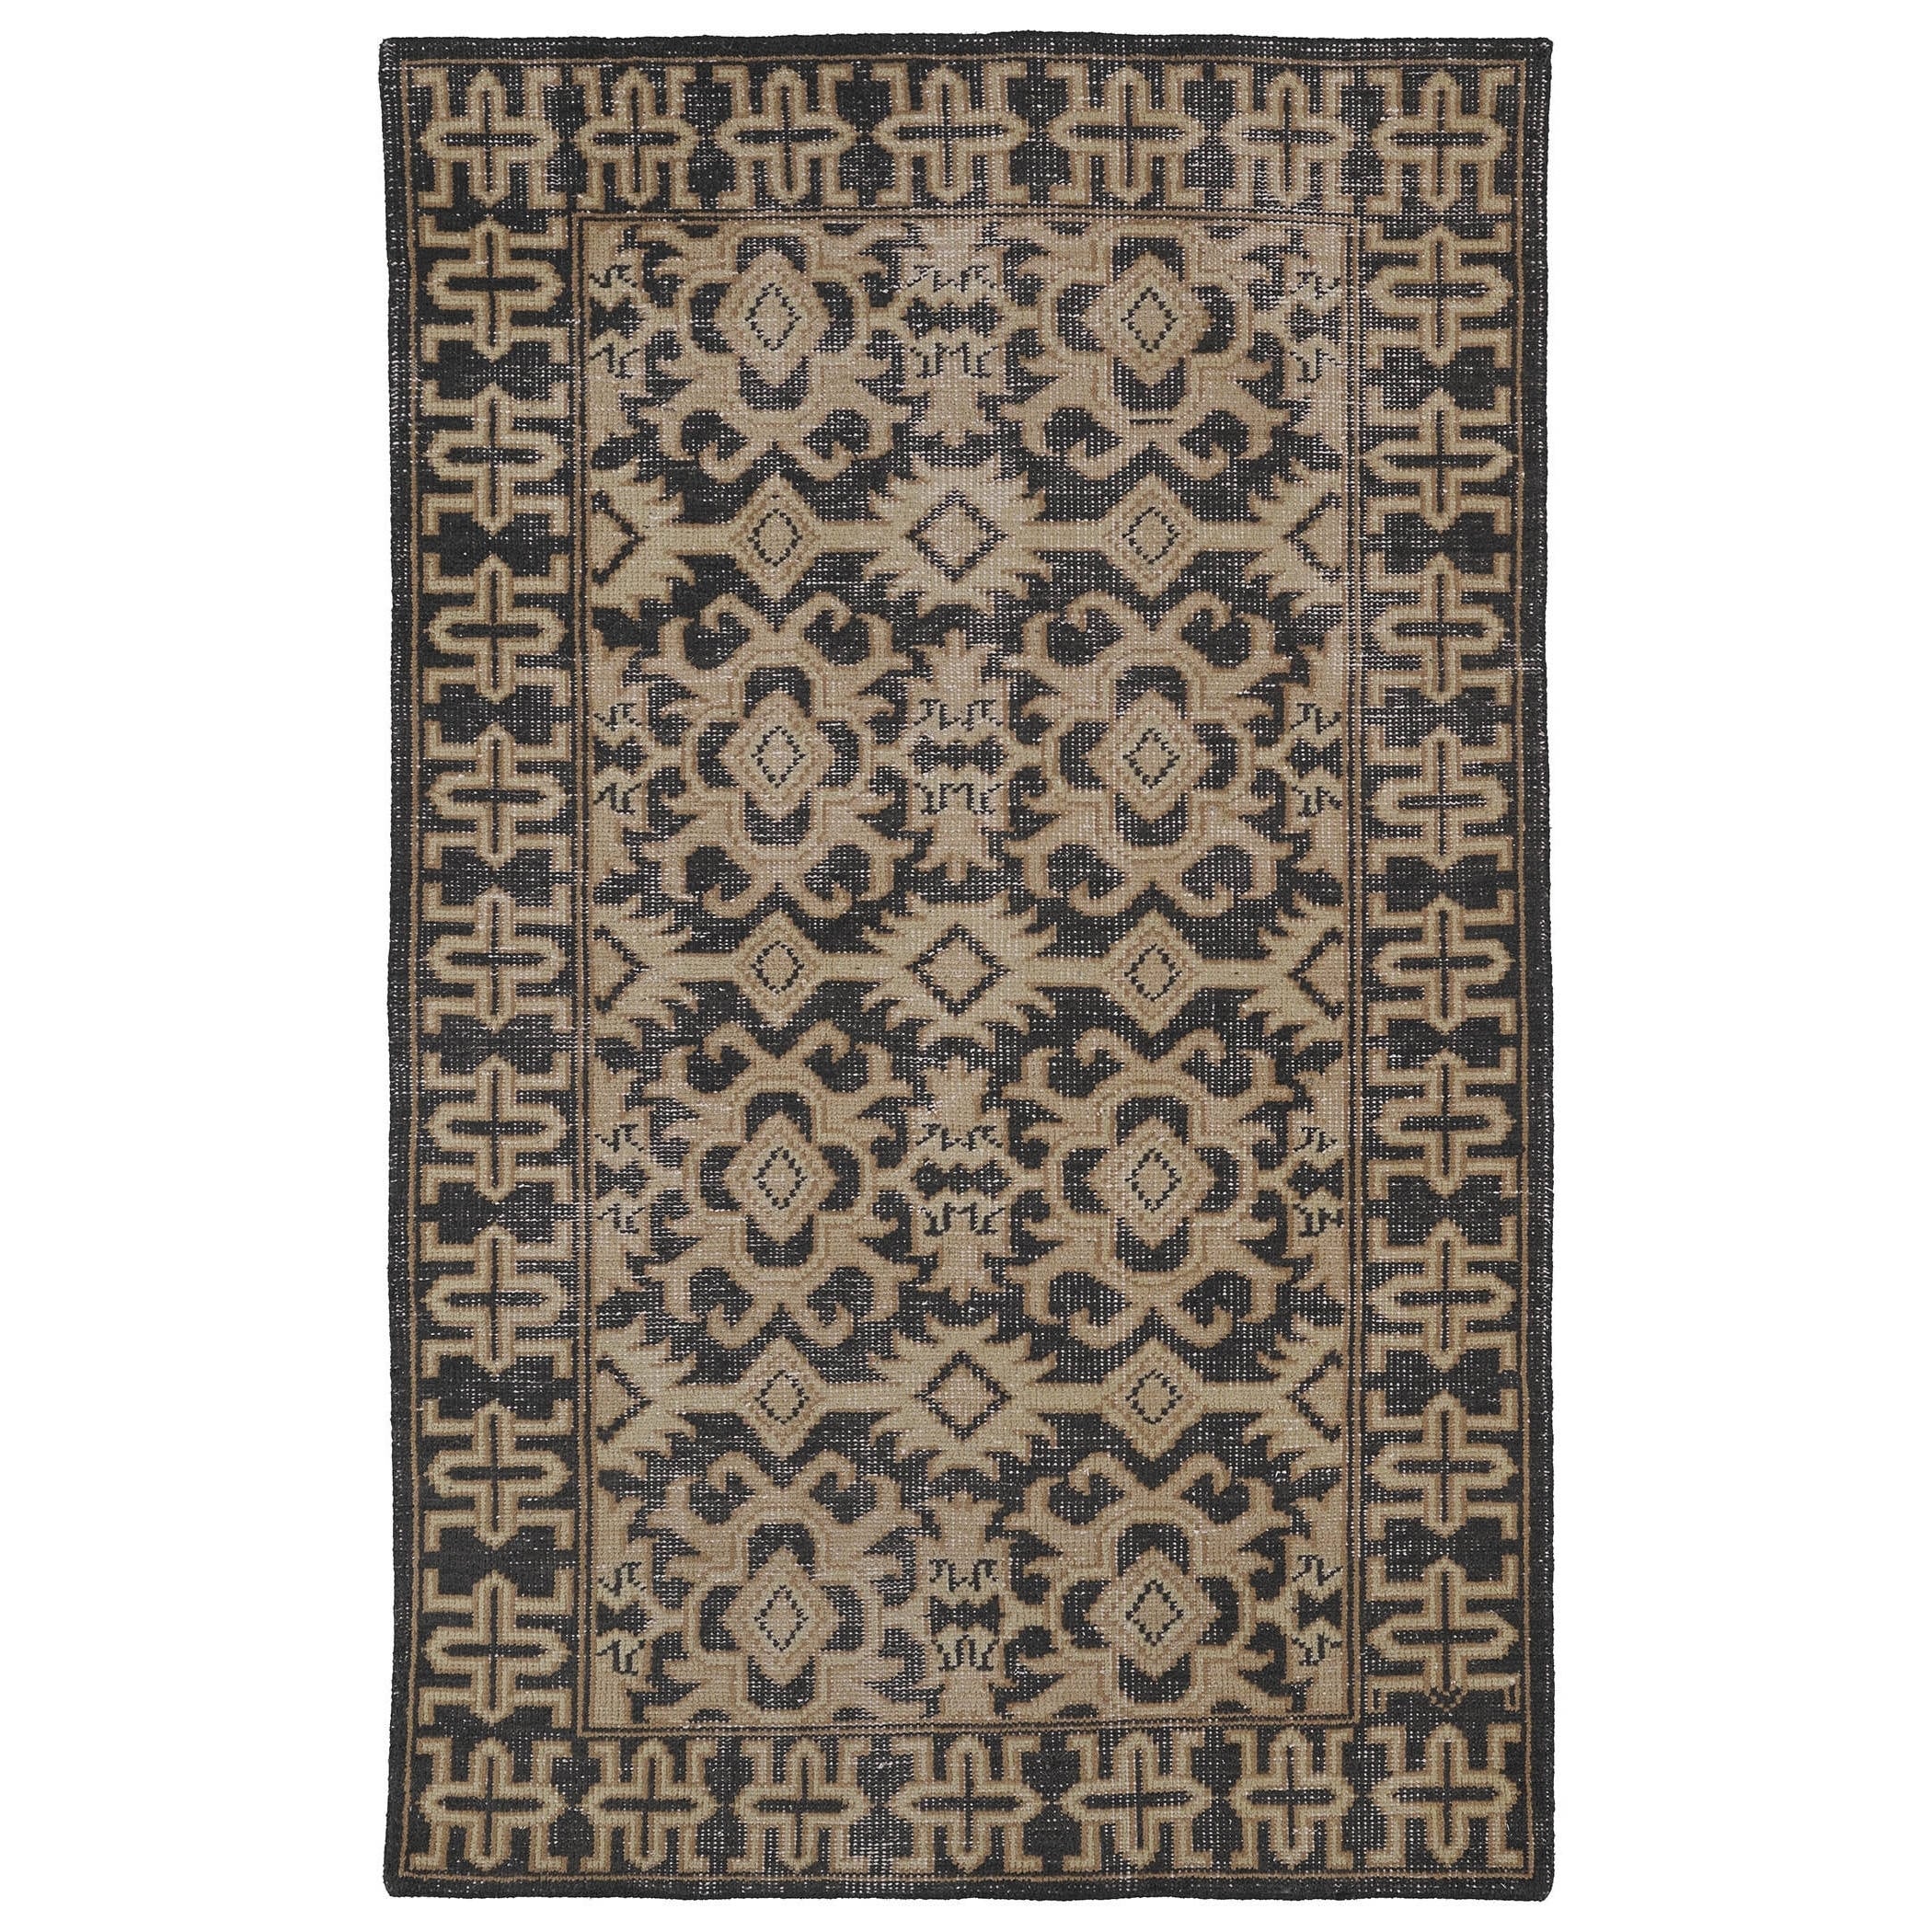 Kaleen Rugs Hand knotted Vintage Replica Chocolate Brown Wool Rug (80 X 100) Brown Size 8 x 10